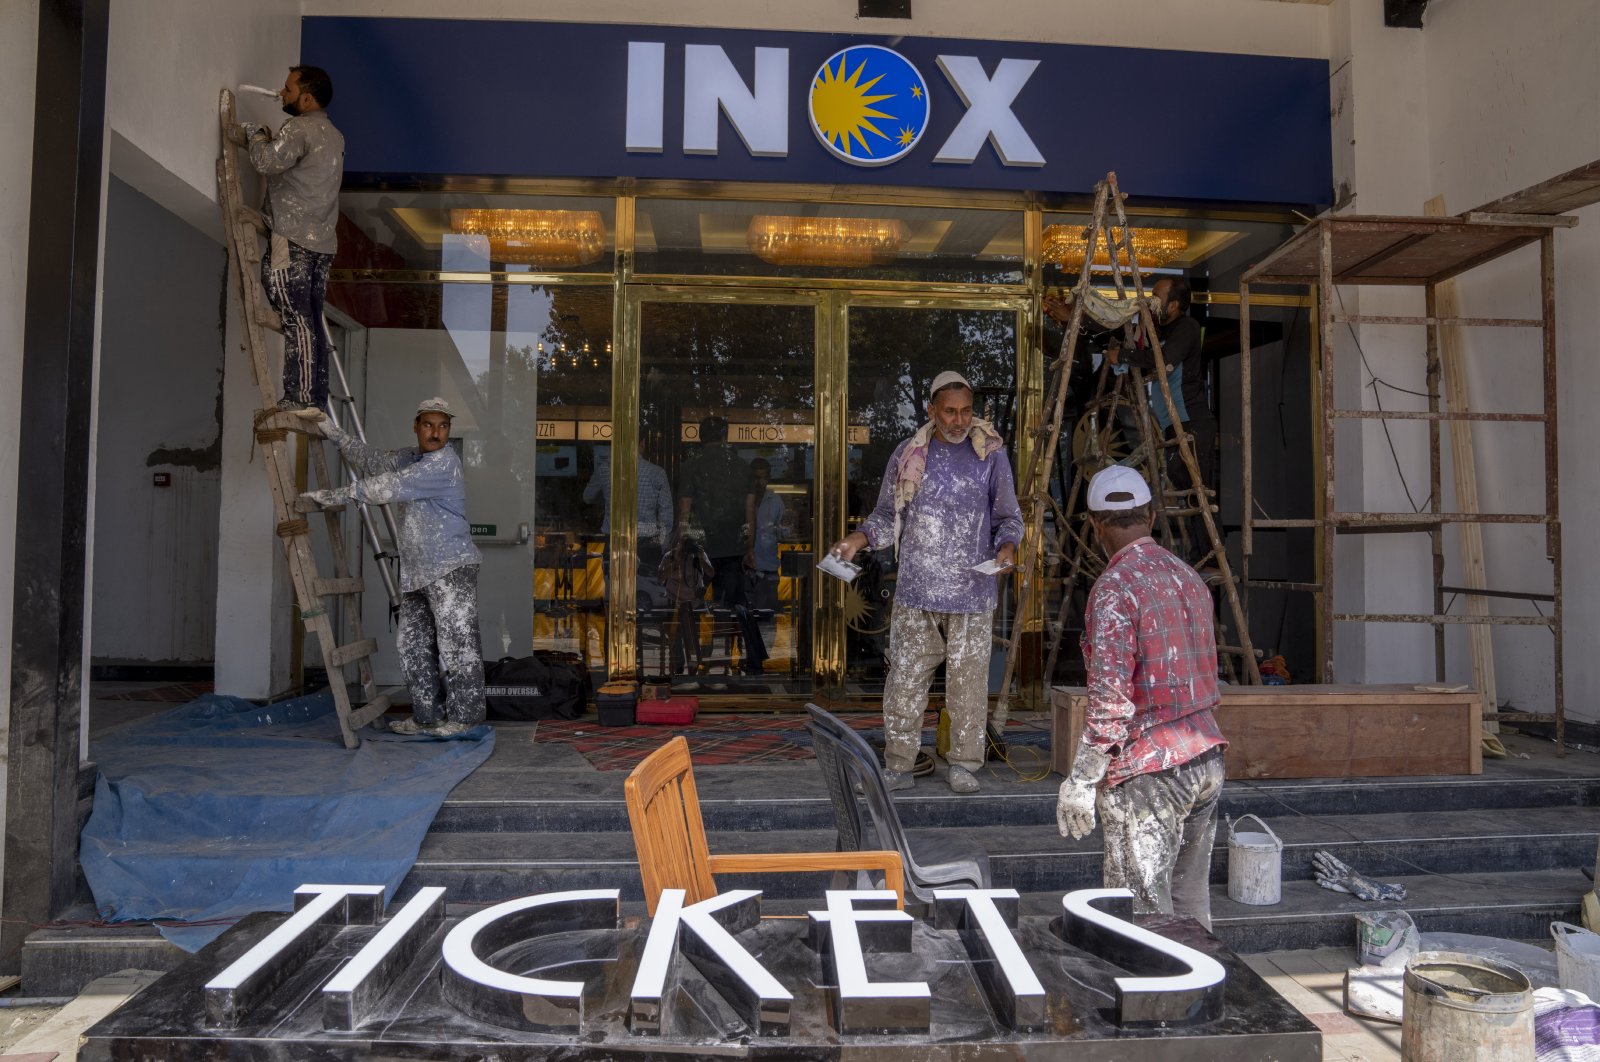 Laborers work outside the newly constructed "INOX" multiplex in Srinagar, Indian-occupied Kashmir, Sept. 19, 2022. (AP Photo)